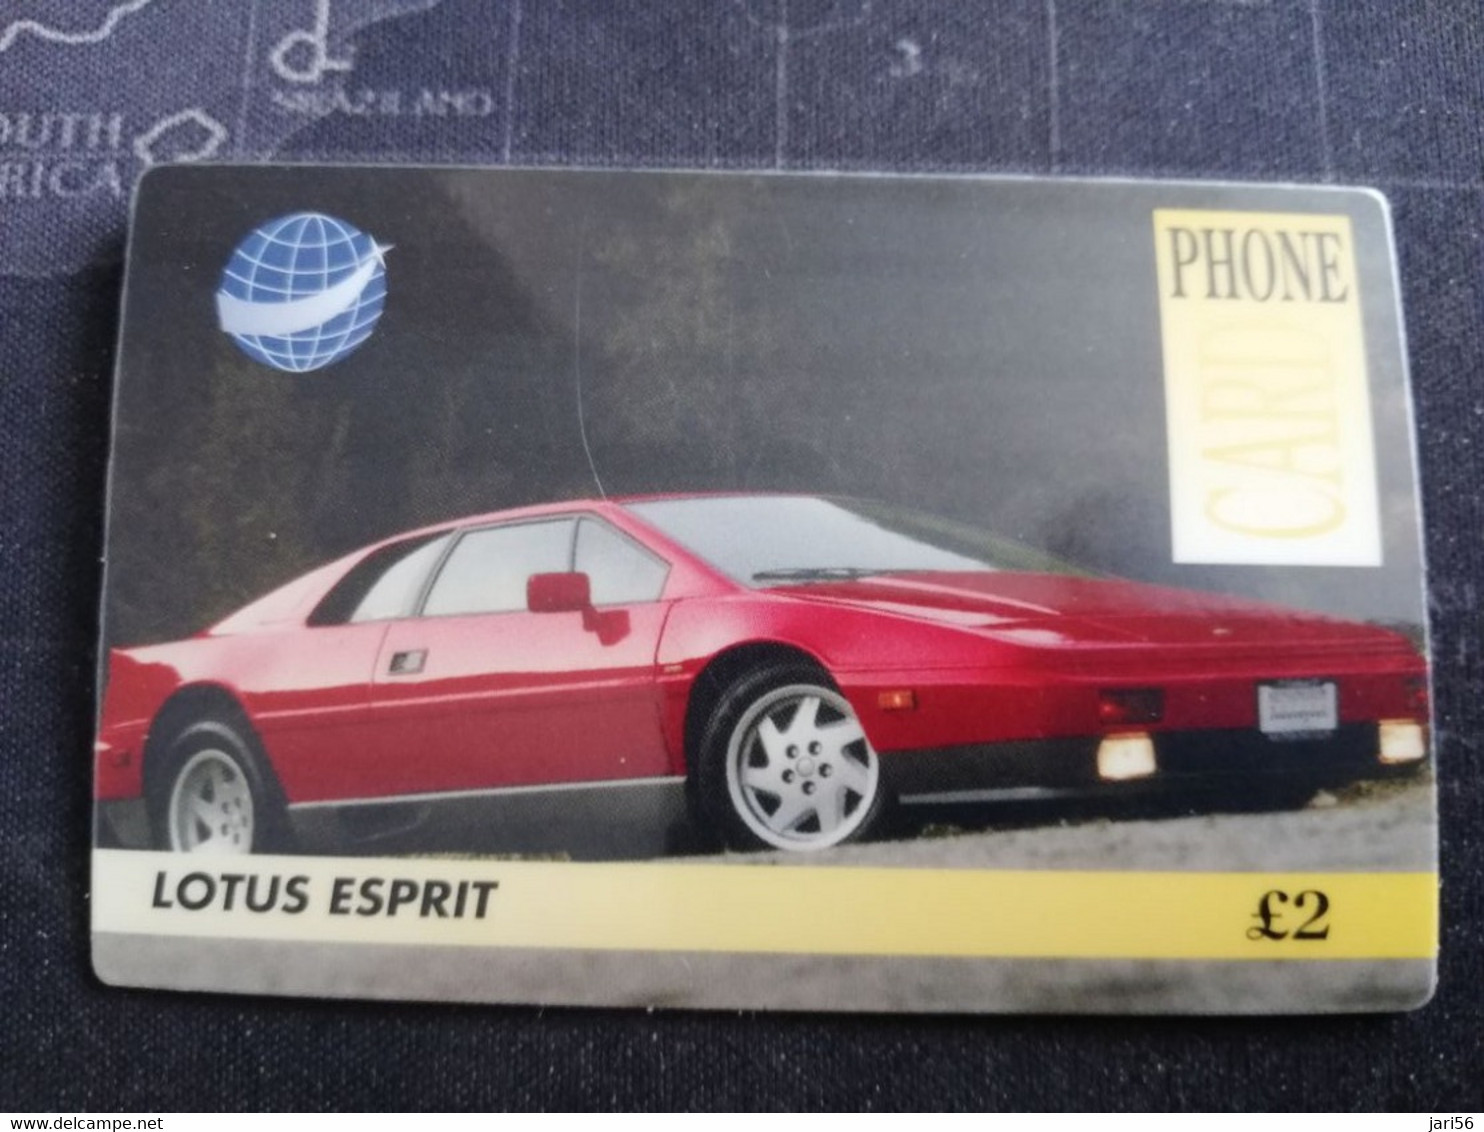 GREAT BRITAIN   2 POUND  LOTUS ESPRIT     AUTOMOBILES/RACING CARS /SPORT CARS  PREPAID      **3264** - [10] Collections